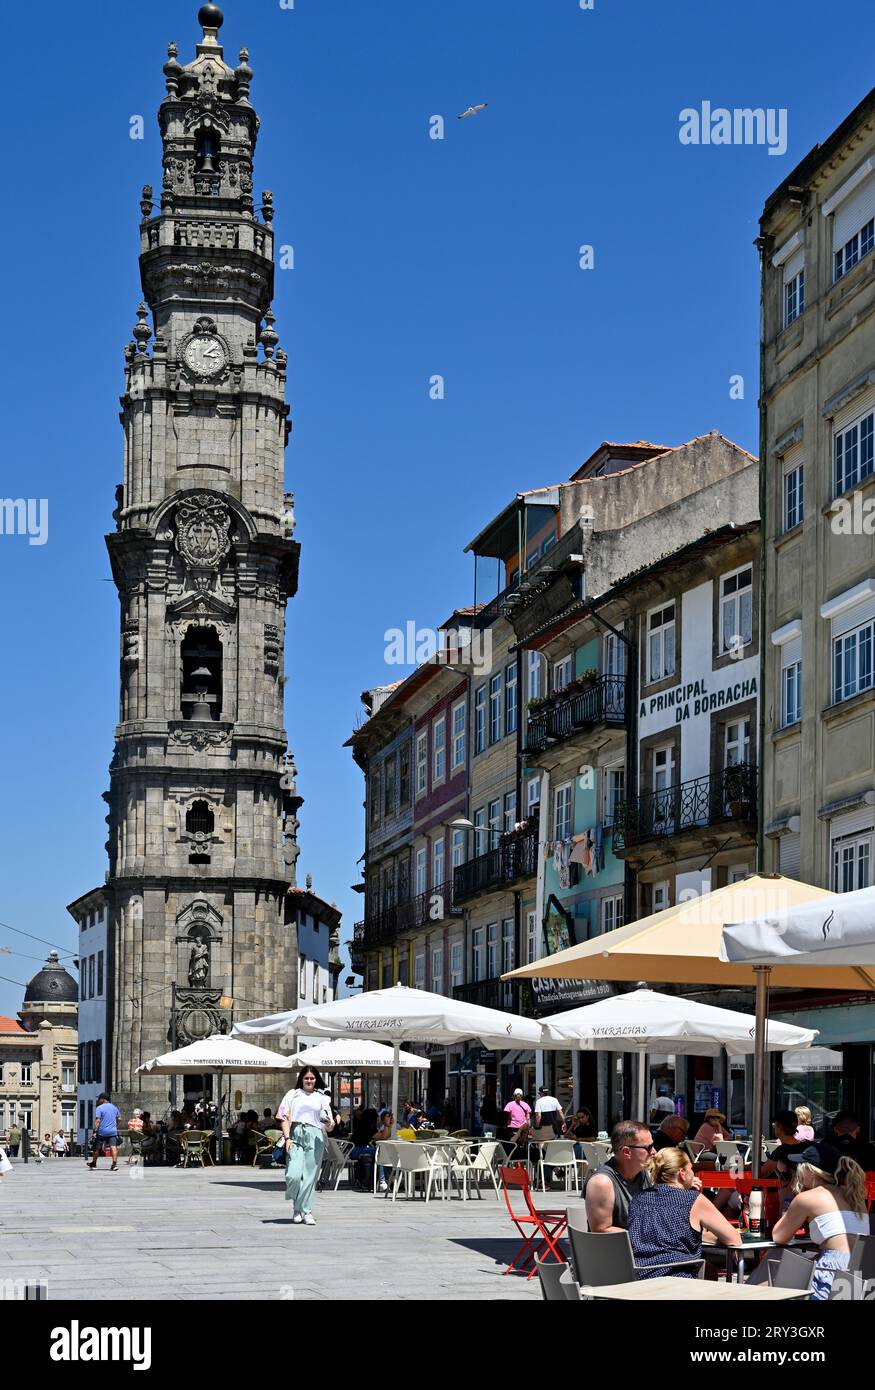 Historic landmark, 76m-high baroque bell tower Torre dos Clérigos with public square and sidewalk eating out in front, Porto, Portugal Stock Photo